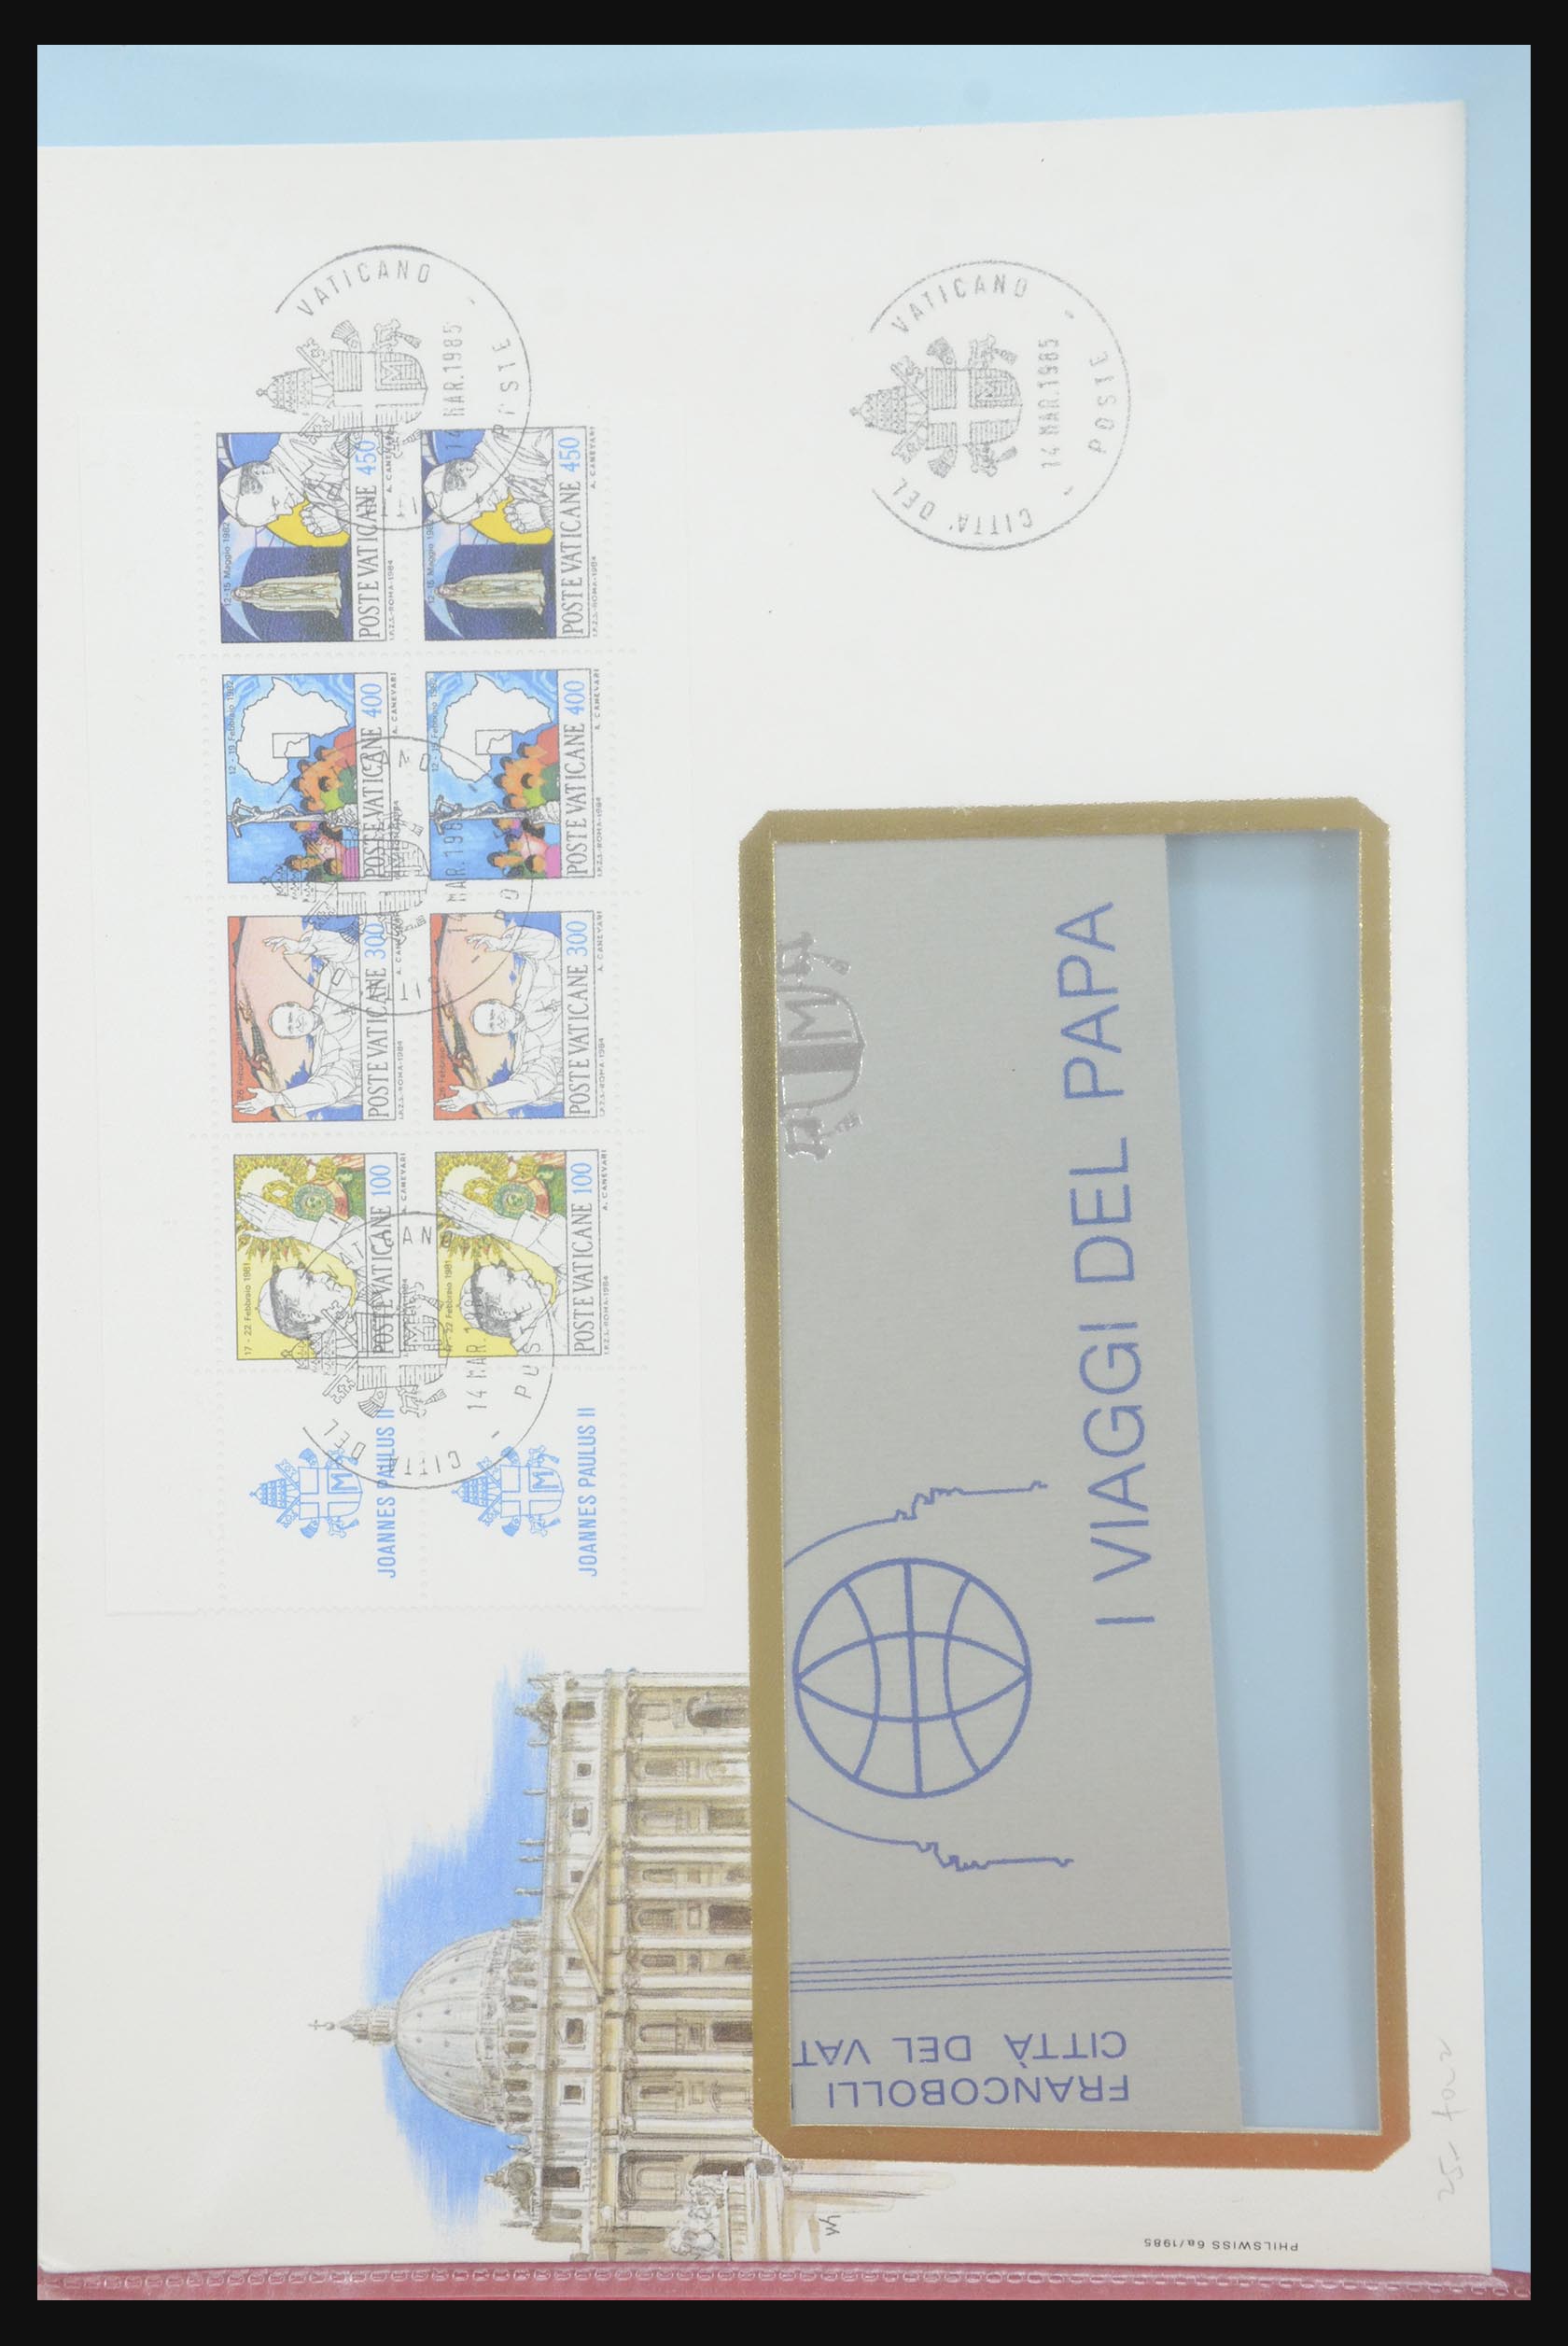 31915 066 - 31915 Western Europe souvenir sheets and stamp booklets on FDC.